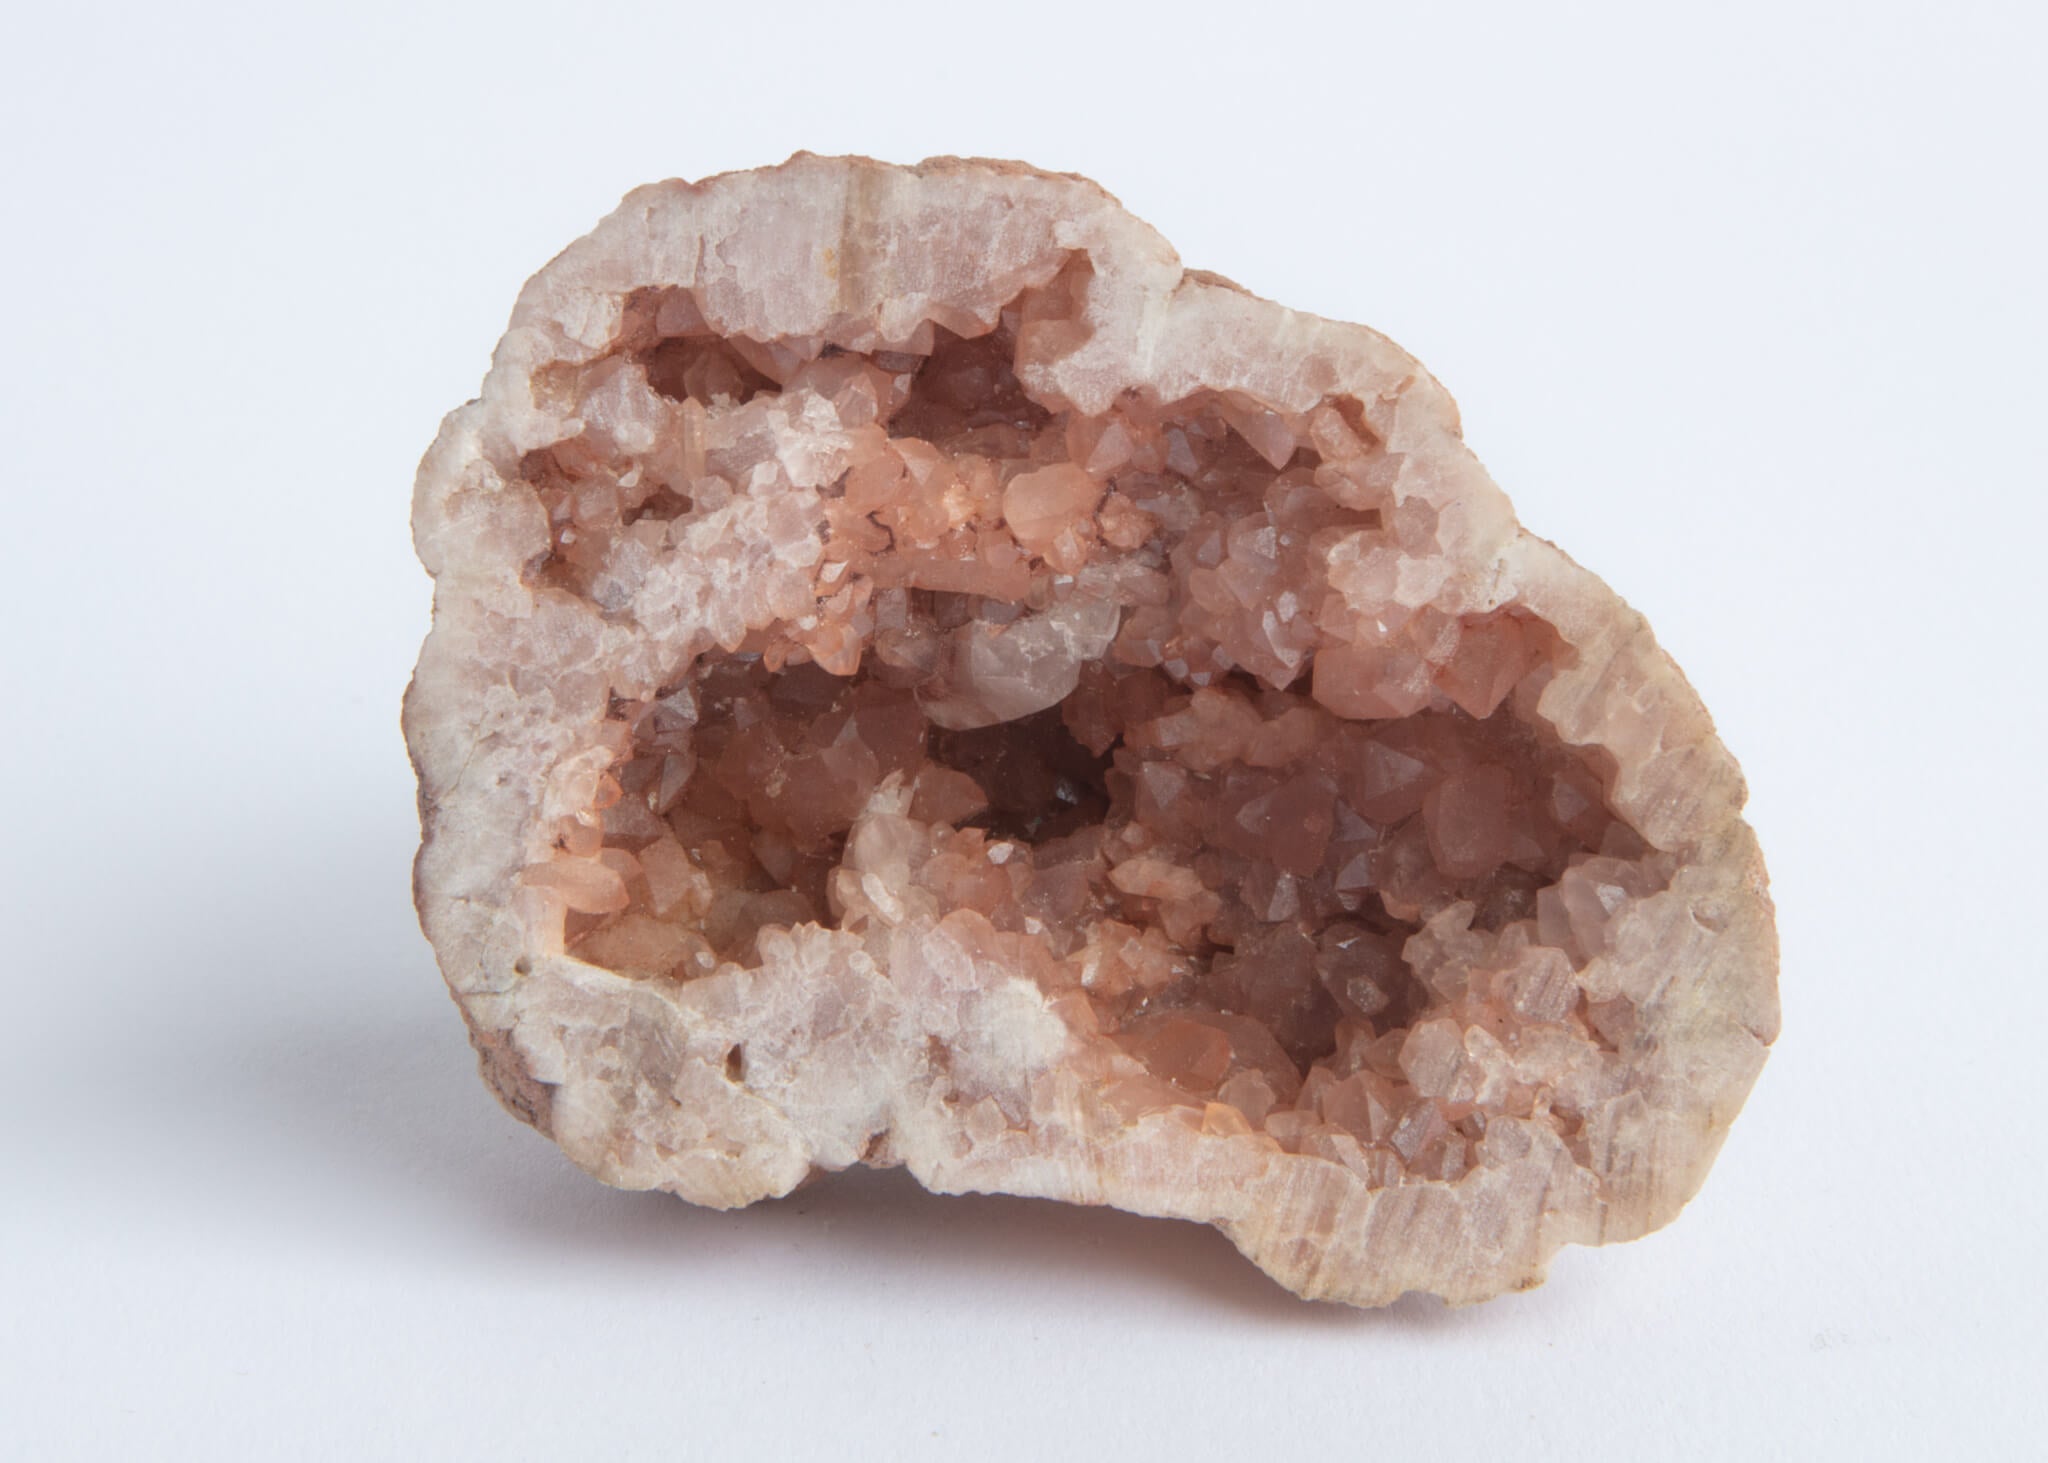 3: 2.13 x 2.75 x 1.13 inches - 91 g - $180. This one also has a calcite crystal within it..